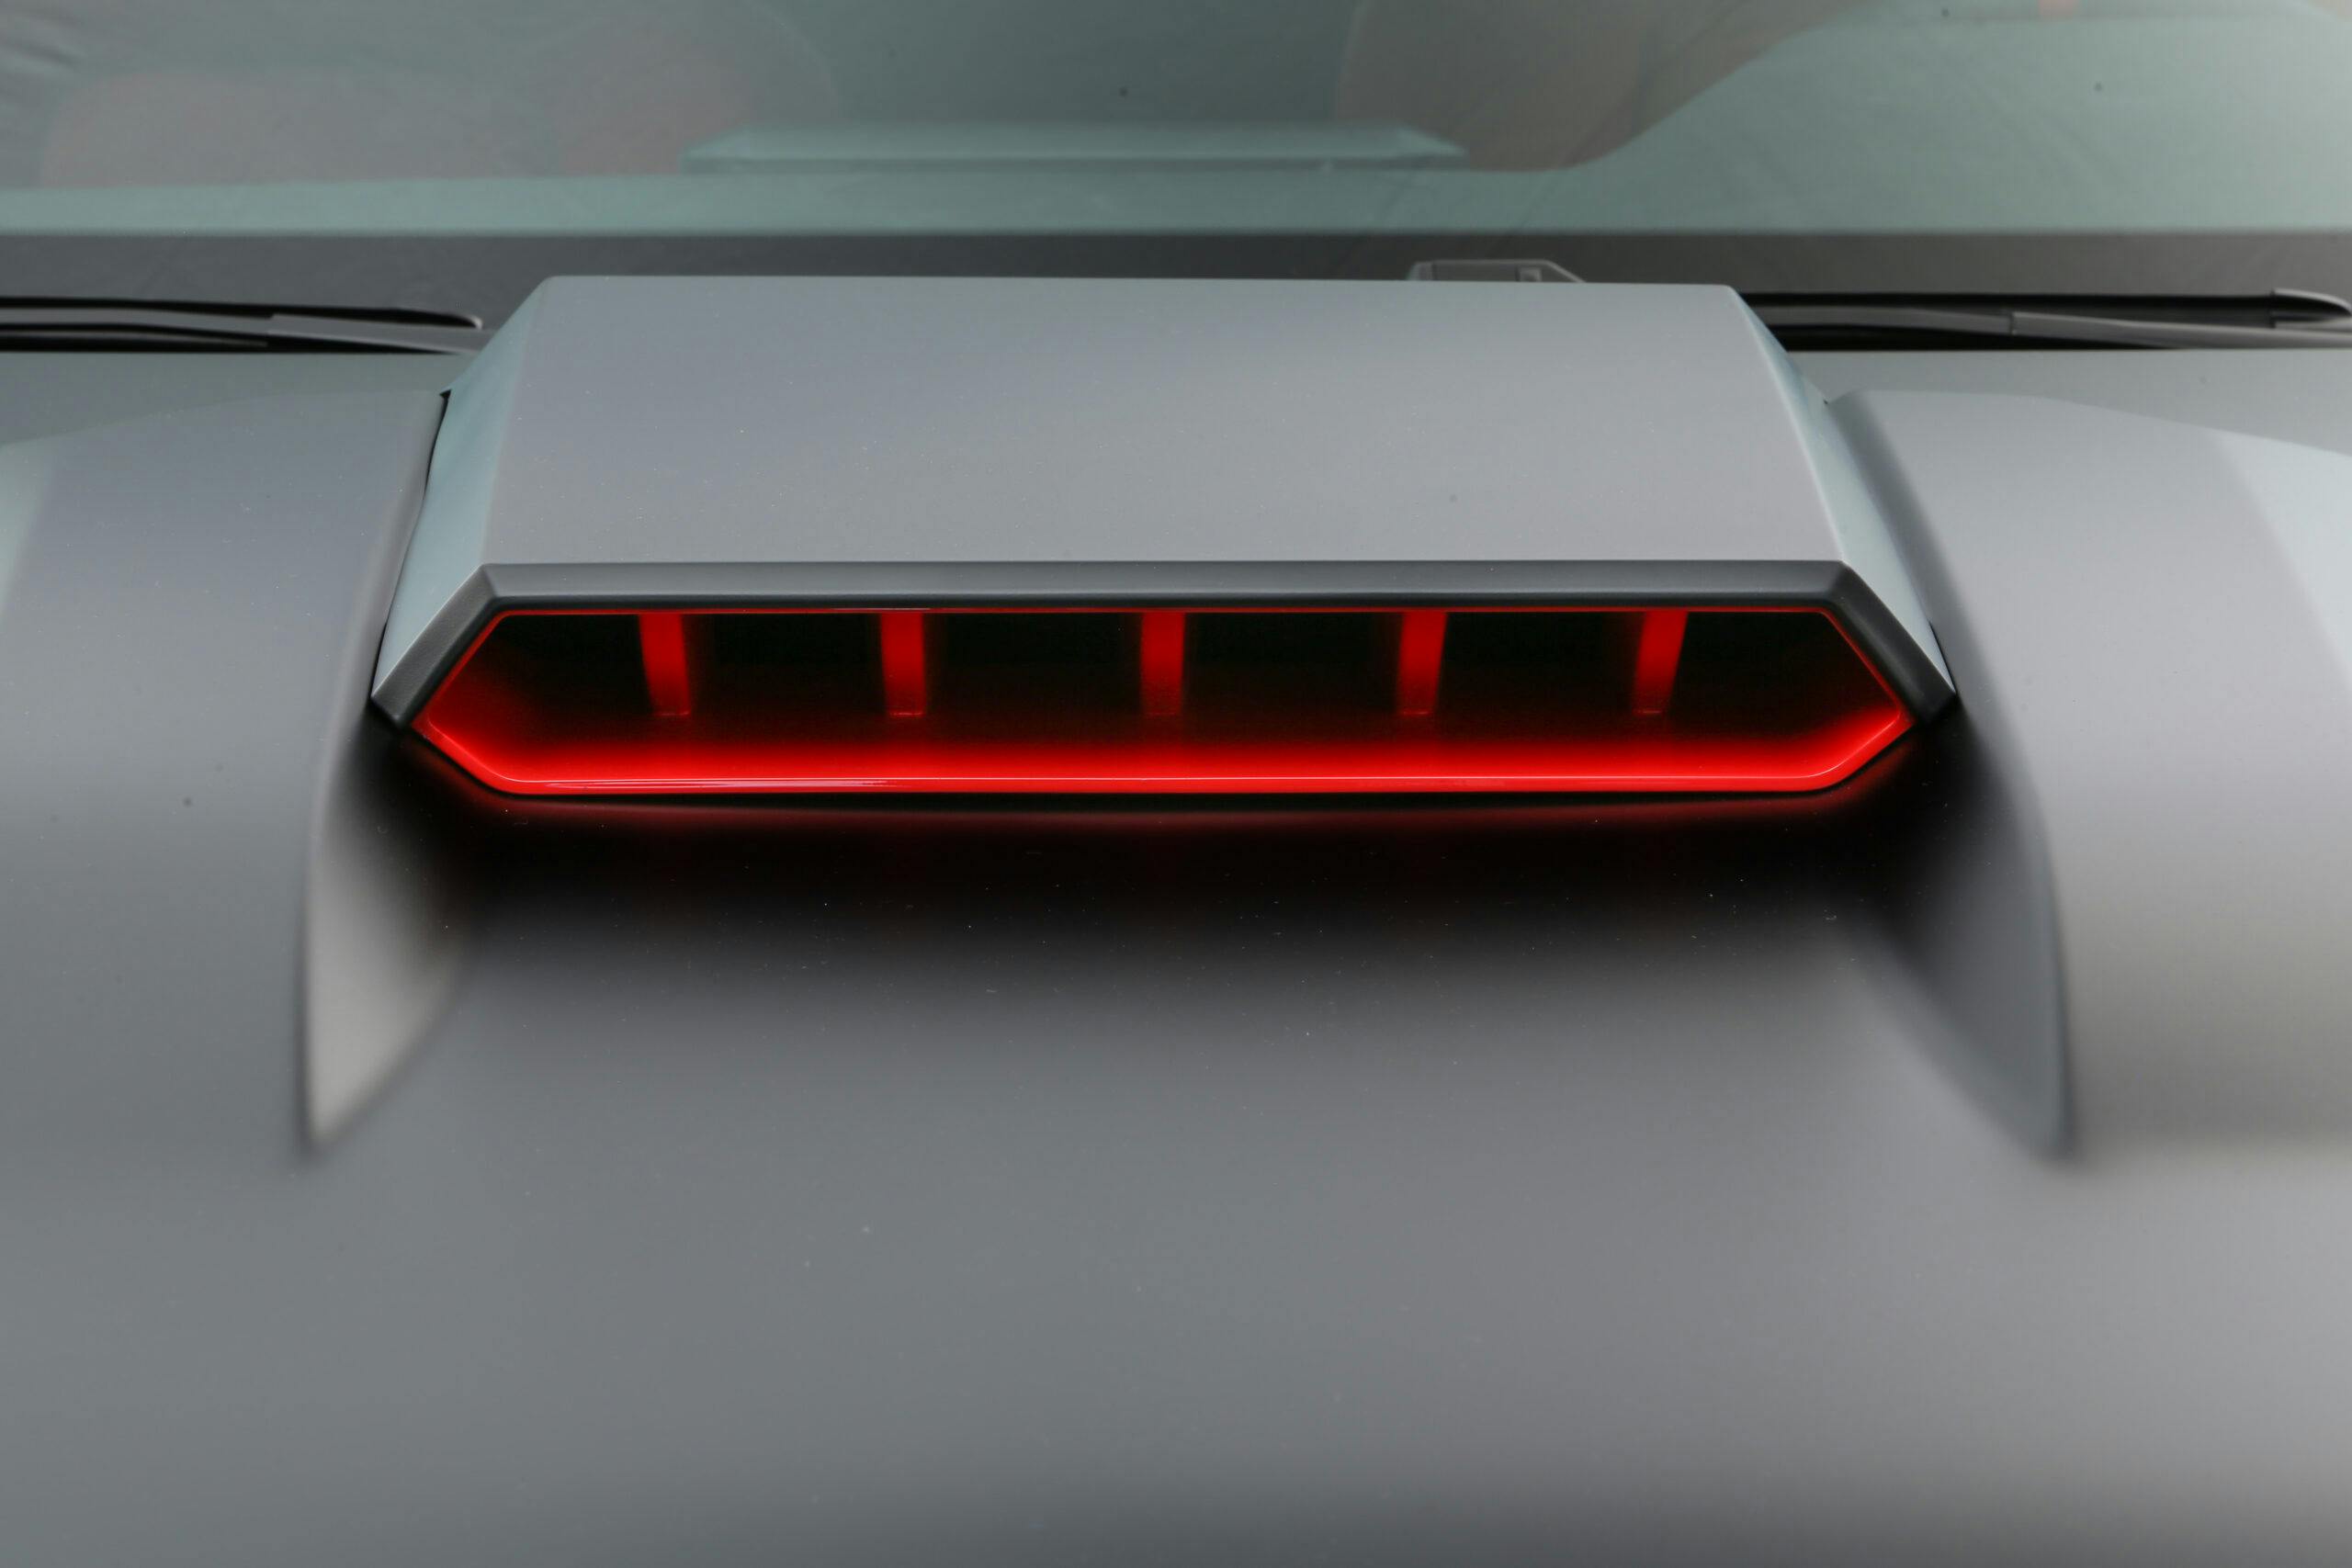 Toyota Tacoma X-Runner Concept exterior hood scoop detail